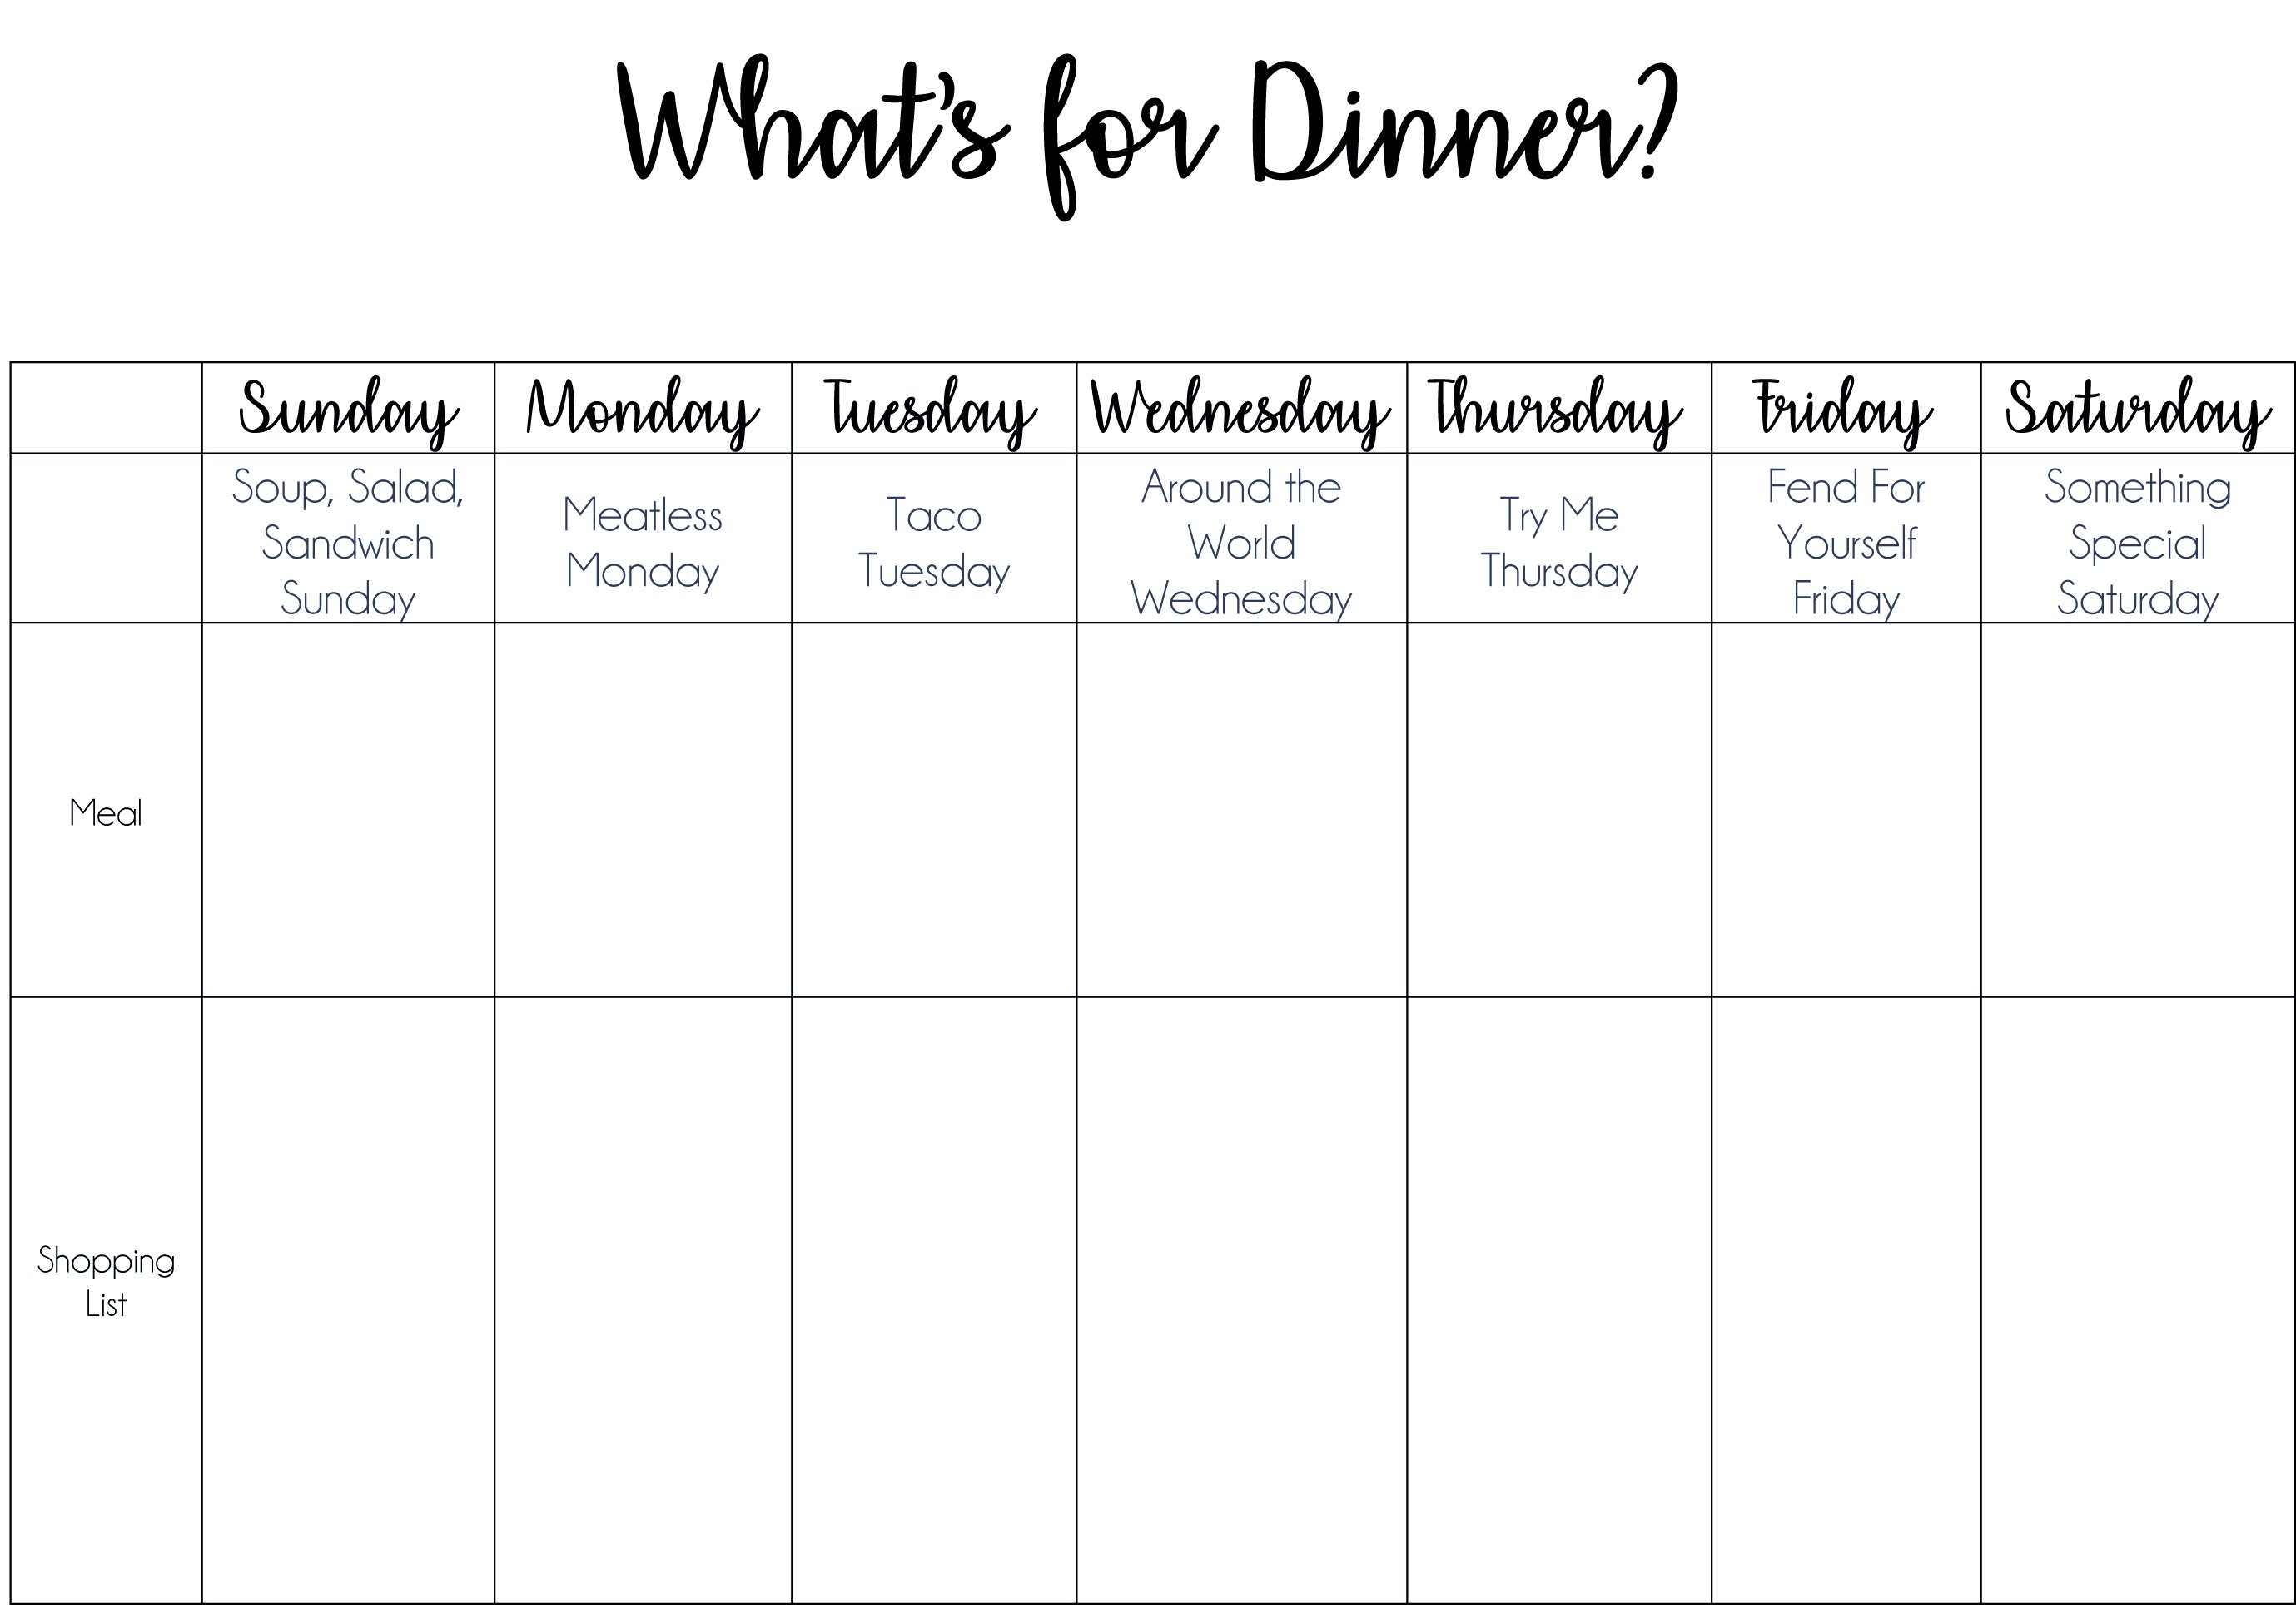 dinner-made-easy-with-a-themed-meal-planning-chart-macaroni-kid-englewood-greenwood-village